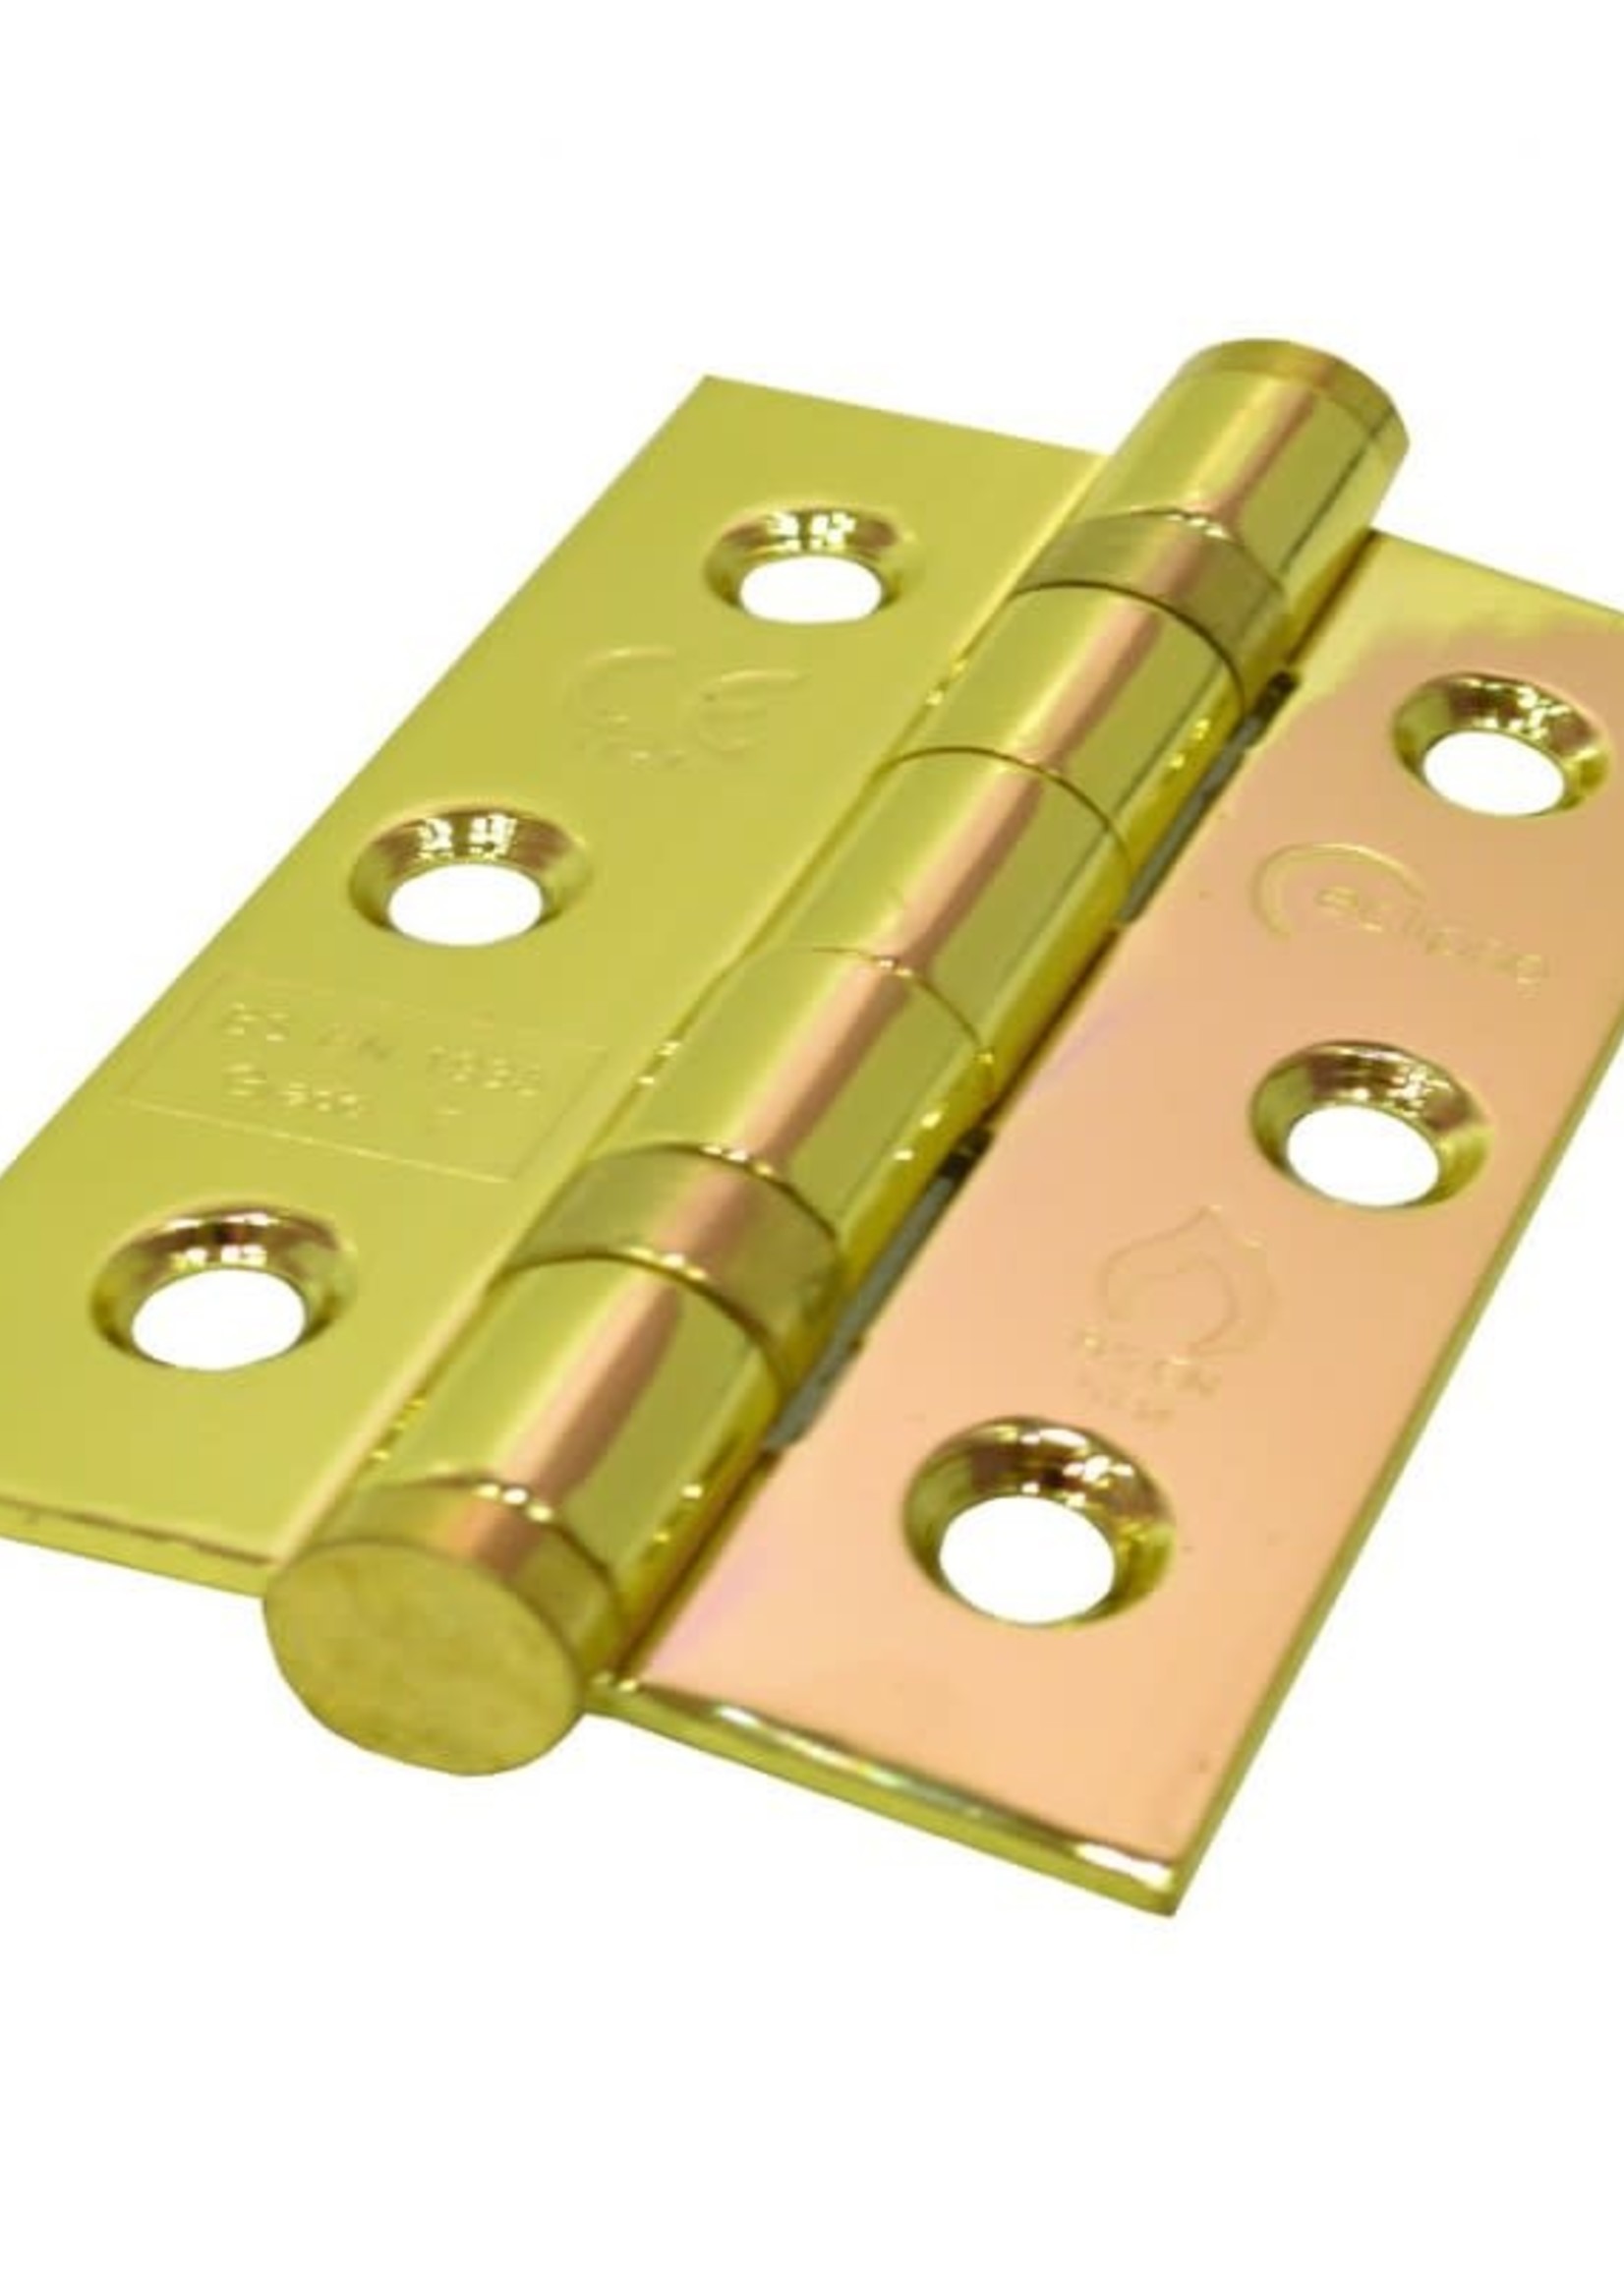 Centurion Brassed CE7 Stainless Ball Bearing Hinges 76mm x 51mm